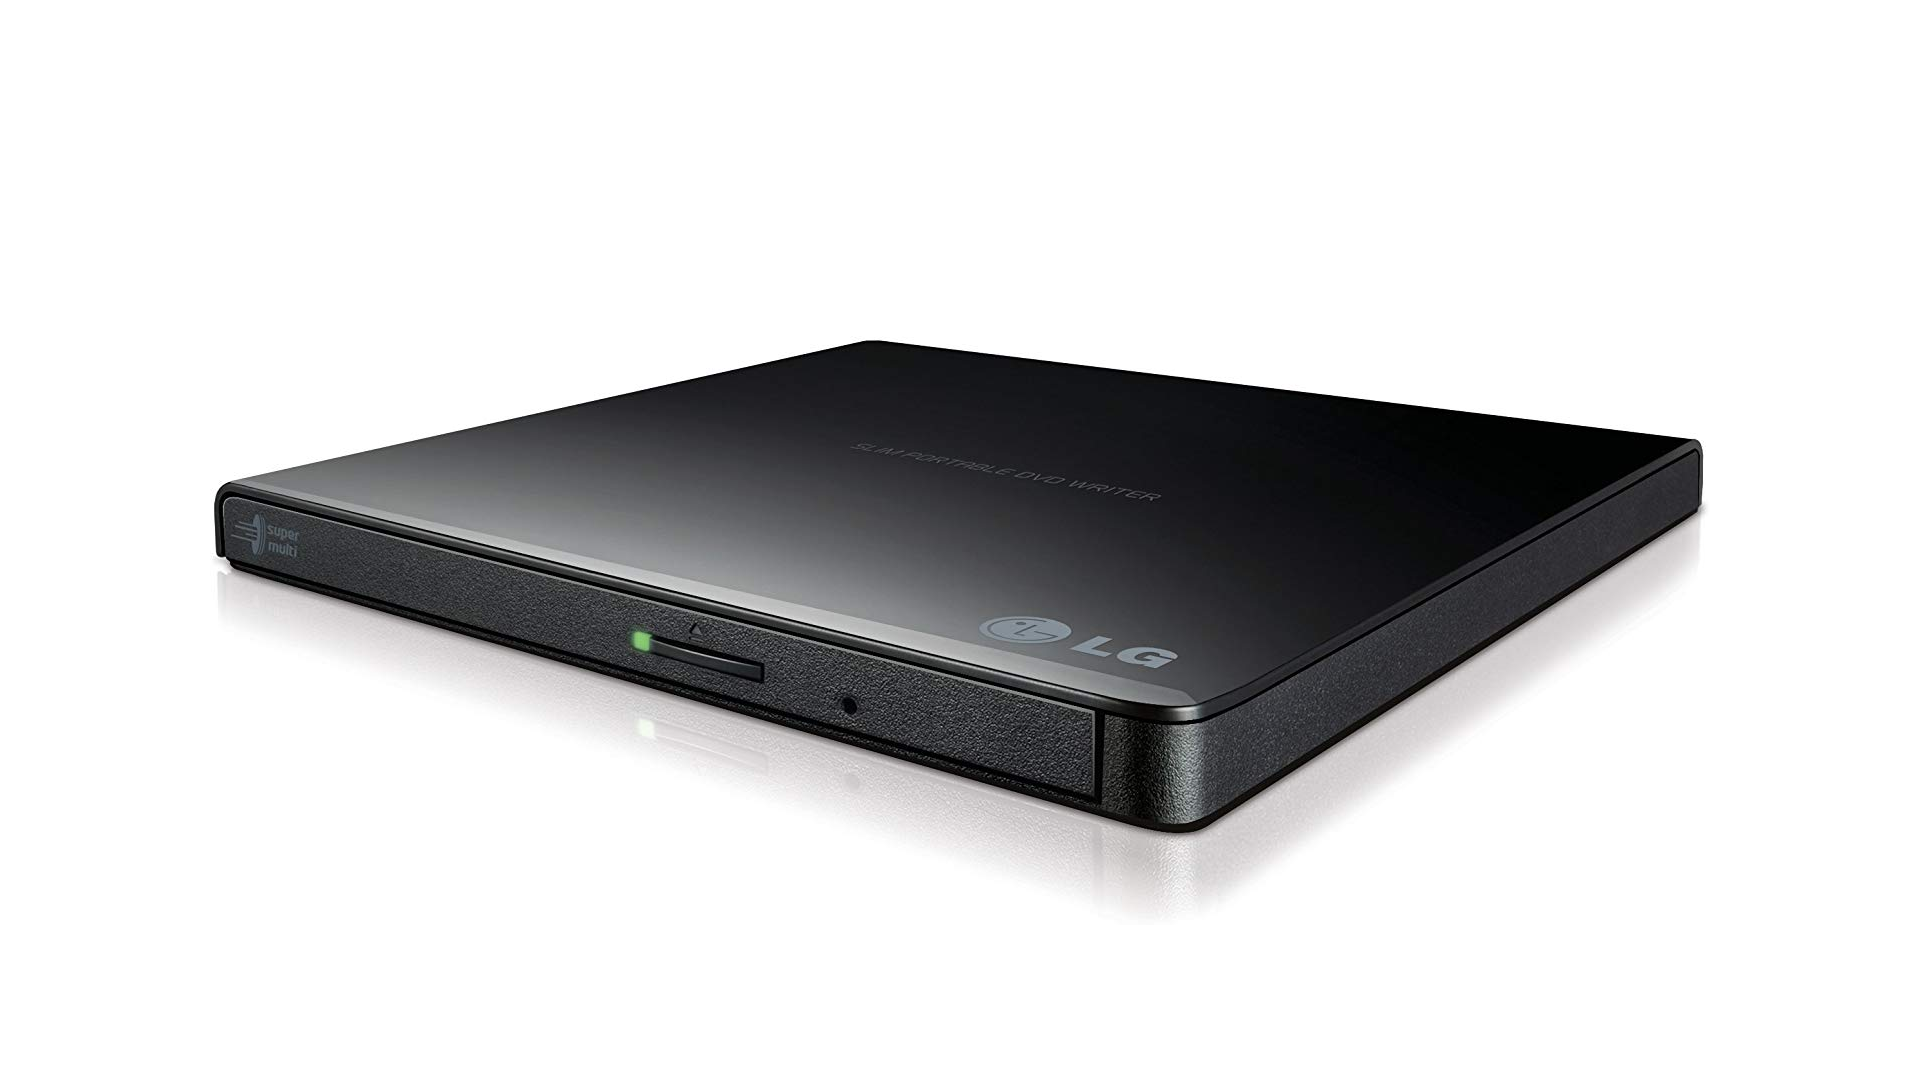 A photo of the LG DVD drive